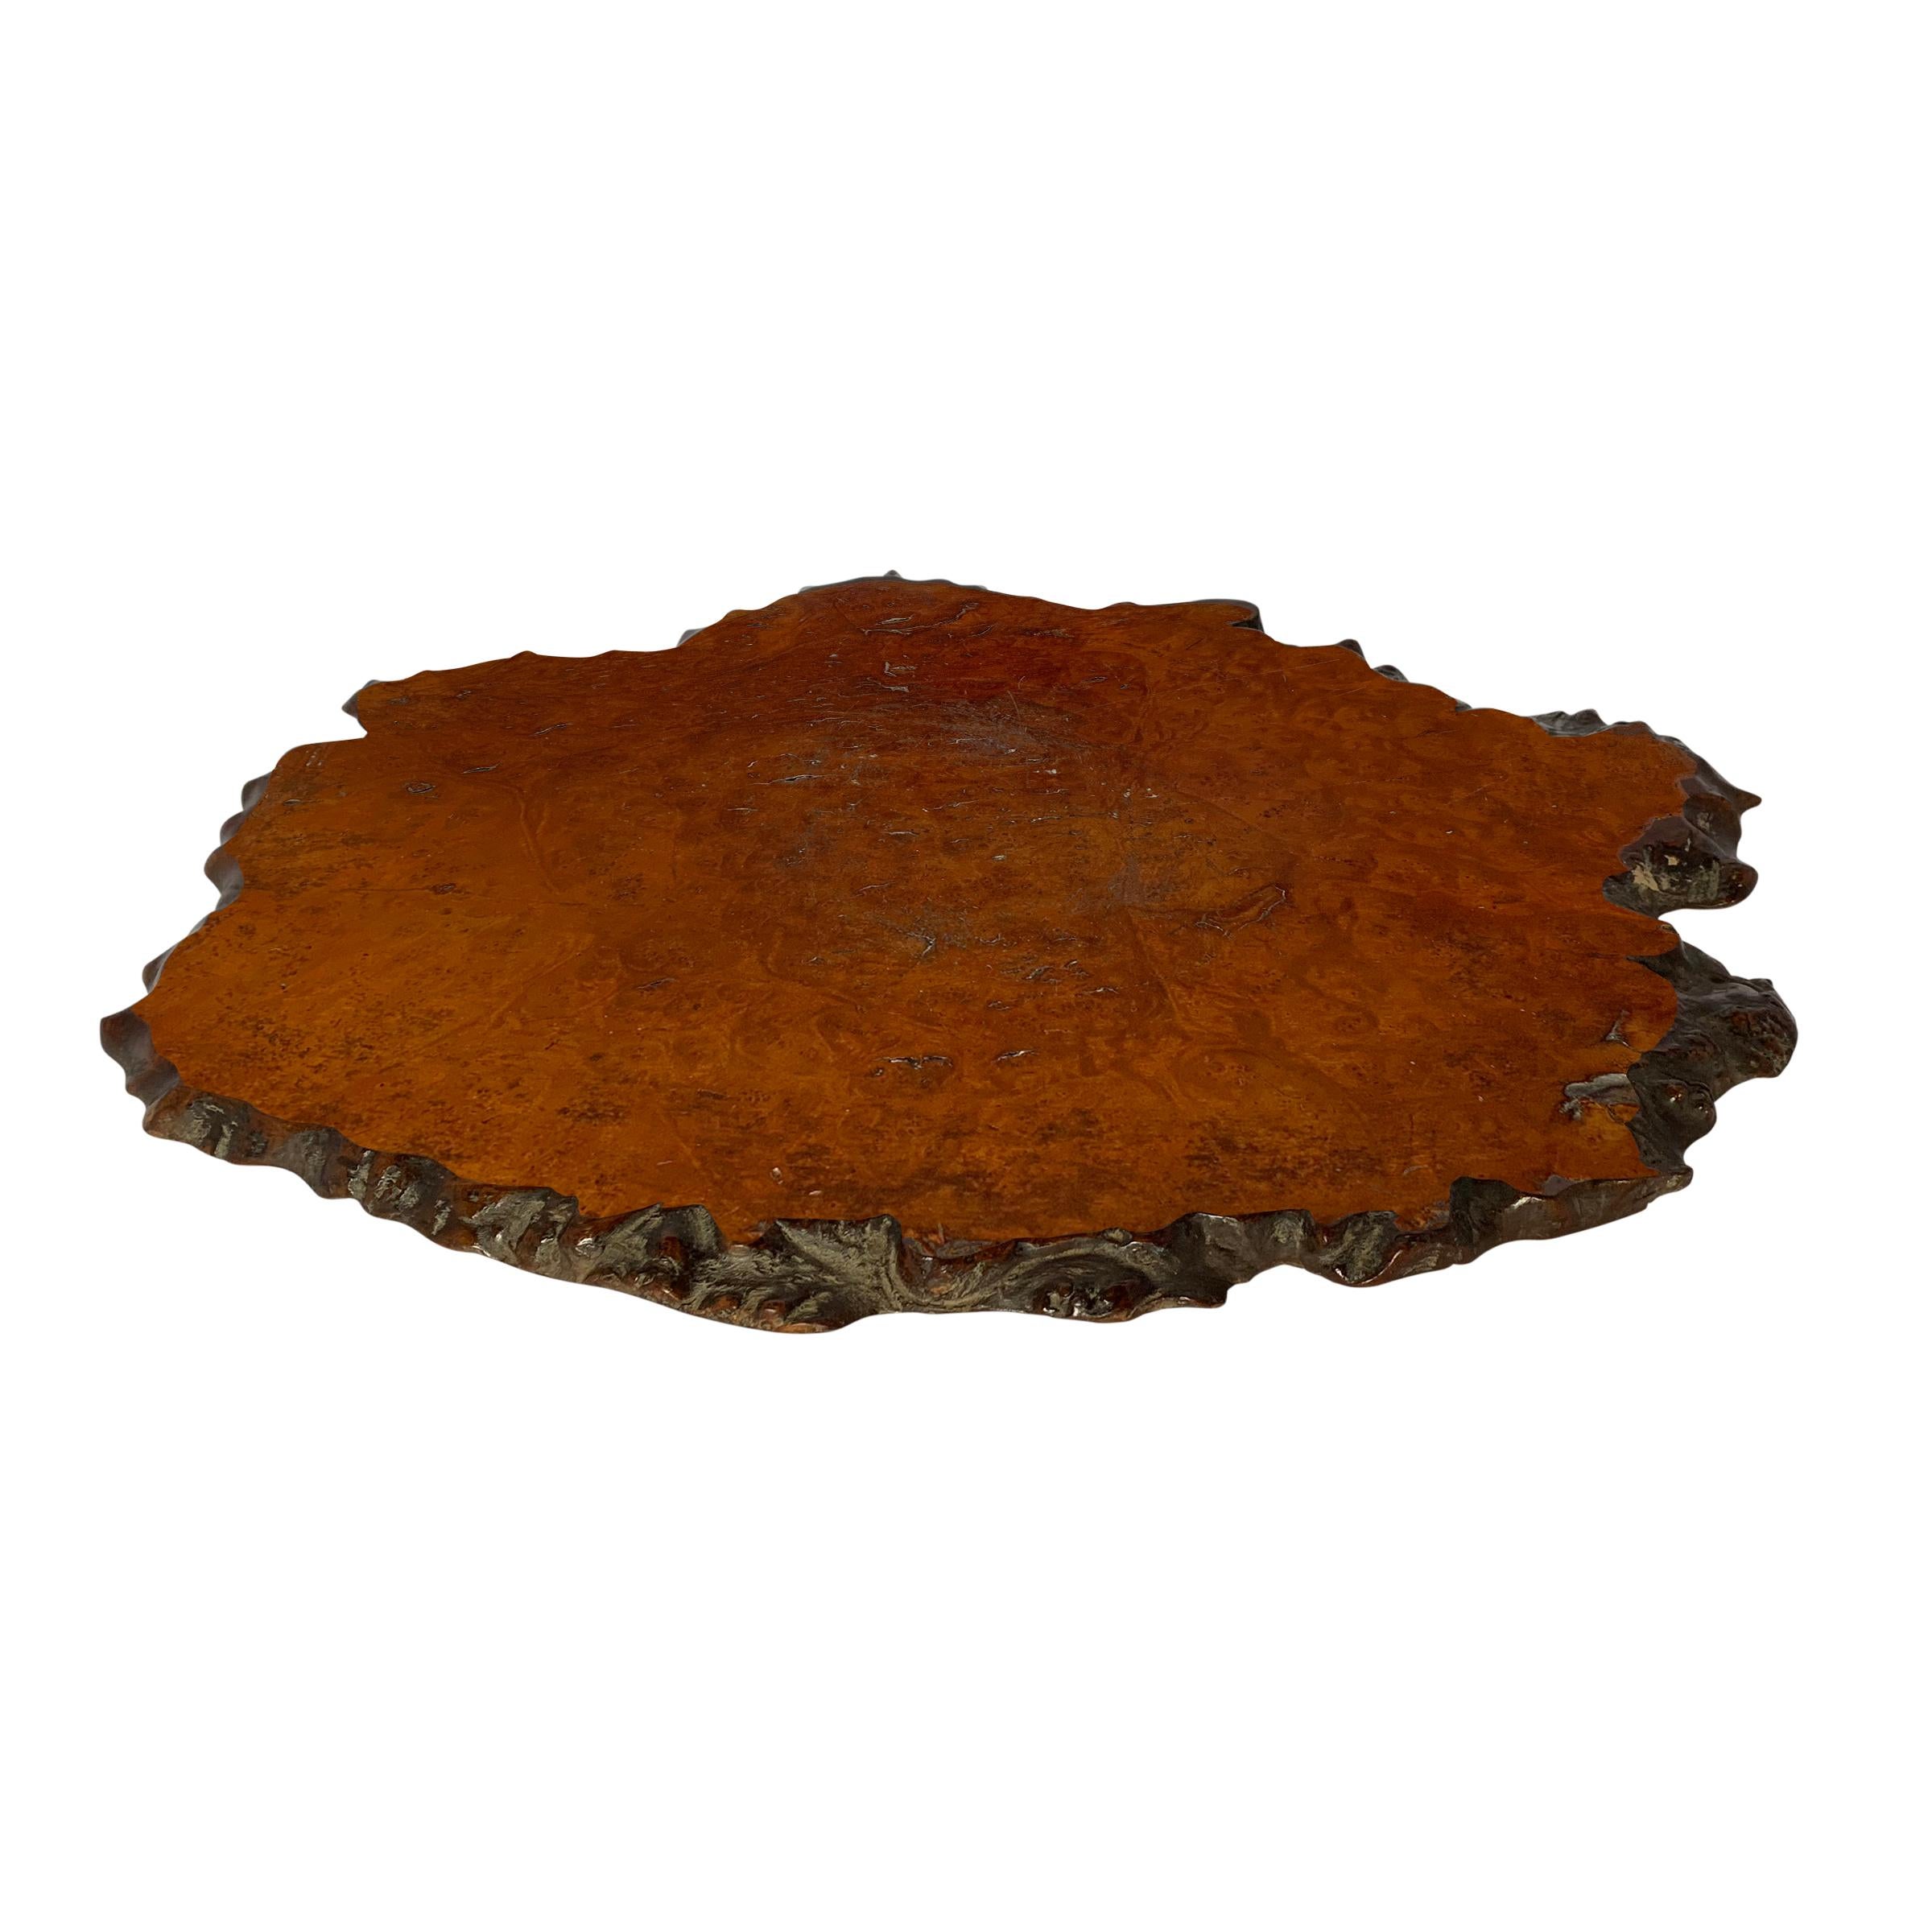 An early 20th century Japanese Wabi Sabi burl wood kadai, or platform, used to display an important object in one's home. We think this would be an exceptional serving platter for equally important objects like cheeses, charcuterie, and fruits, at